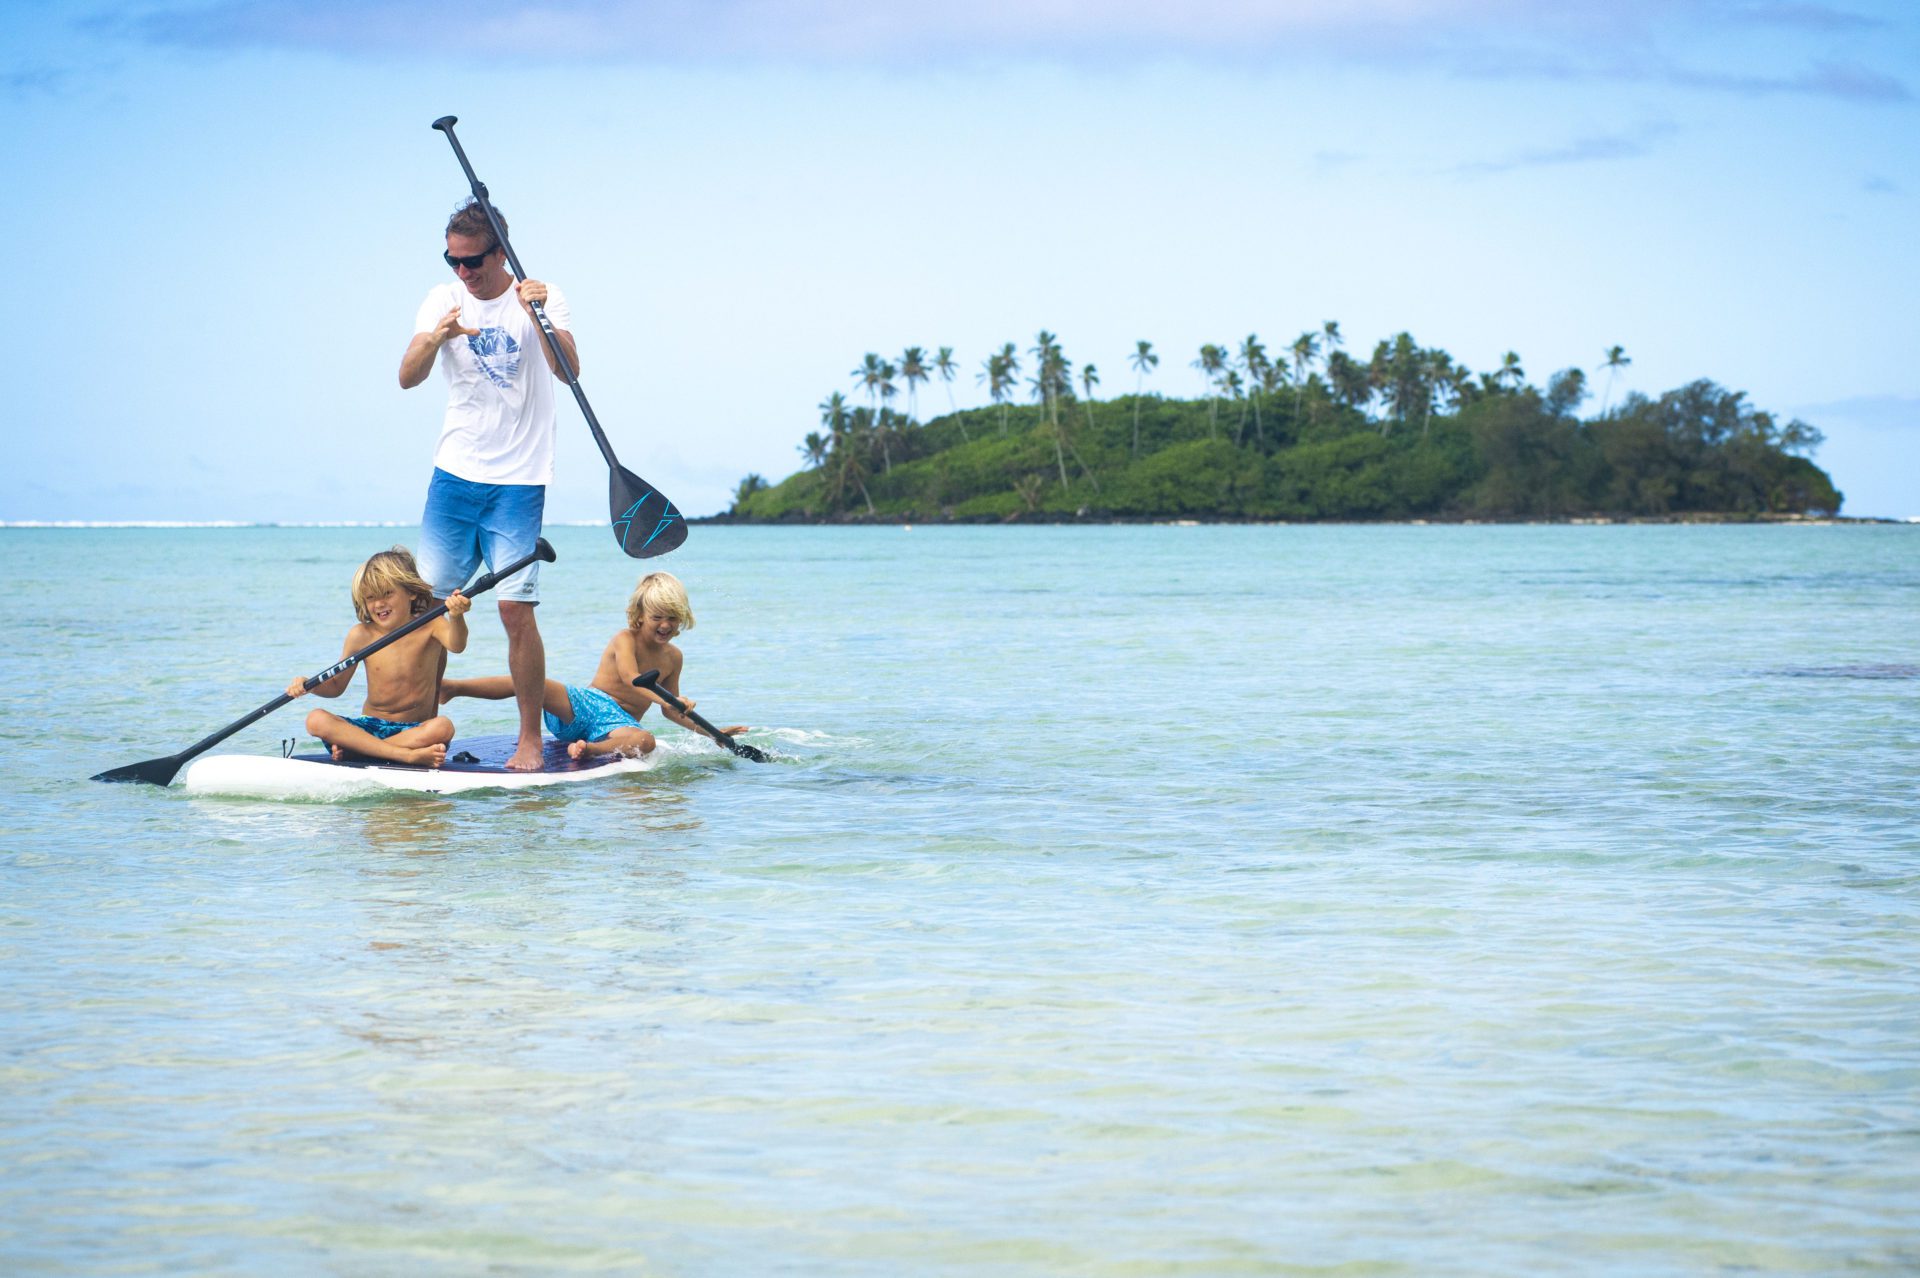 A beautiful image of father and two sons bonding in the lagoon sharing a stand-up paddleboard and smilingly paddles through the waters of Muri